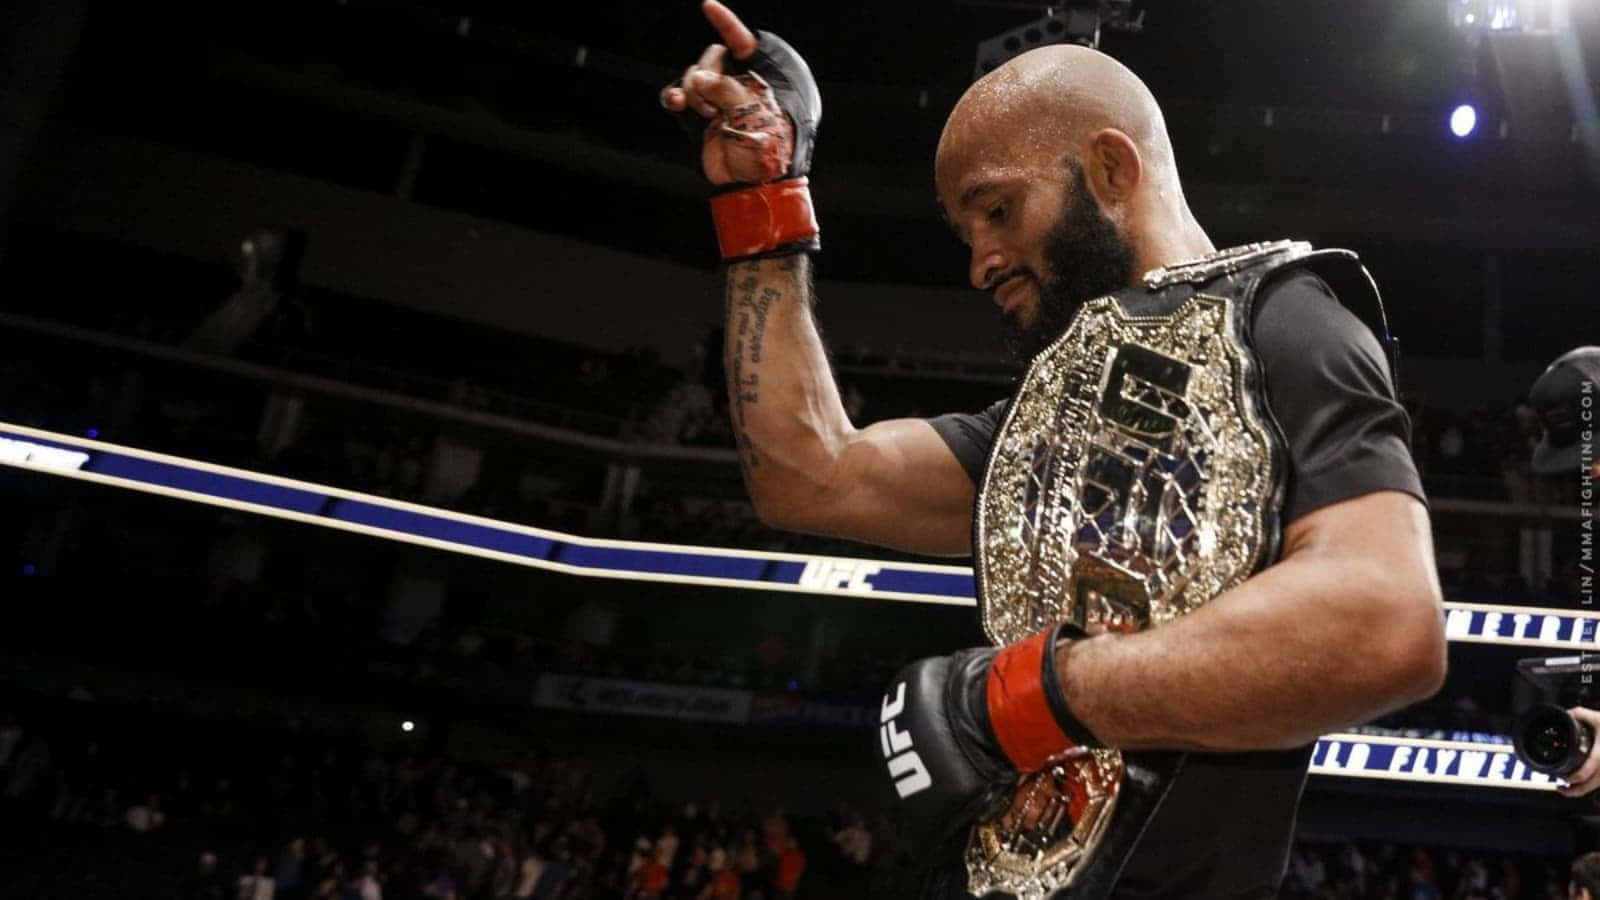 Download Mma Champion Demetrious Johnson As Mighty Mouse Wallpaper